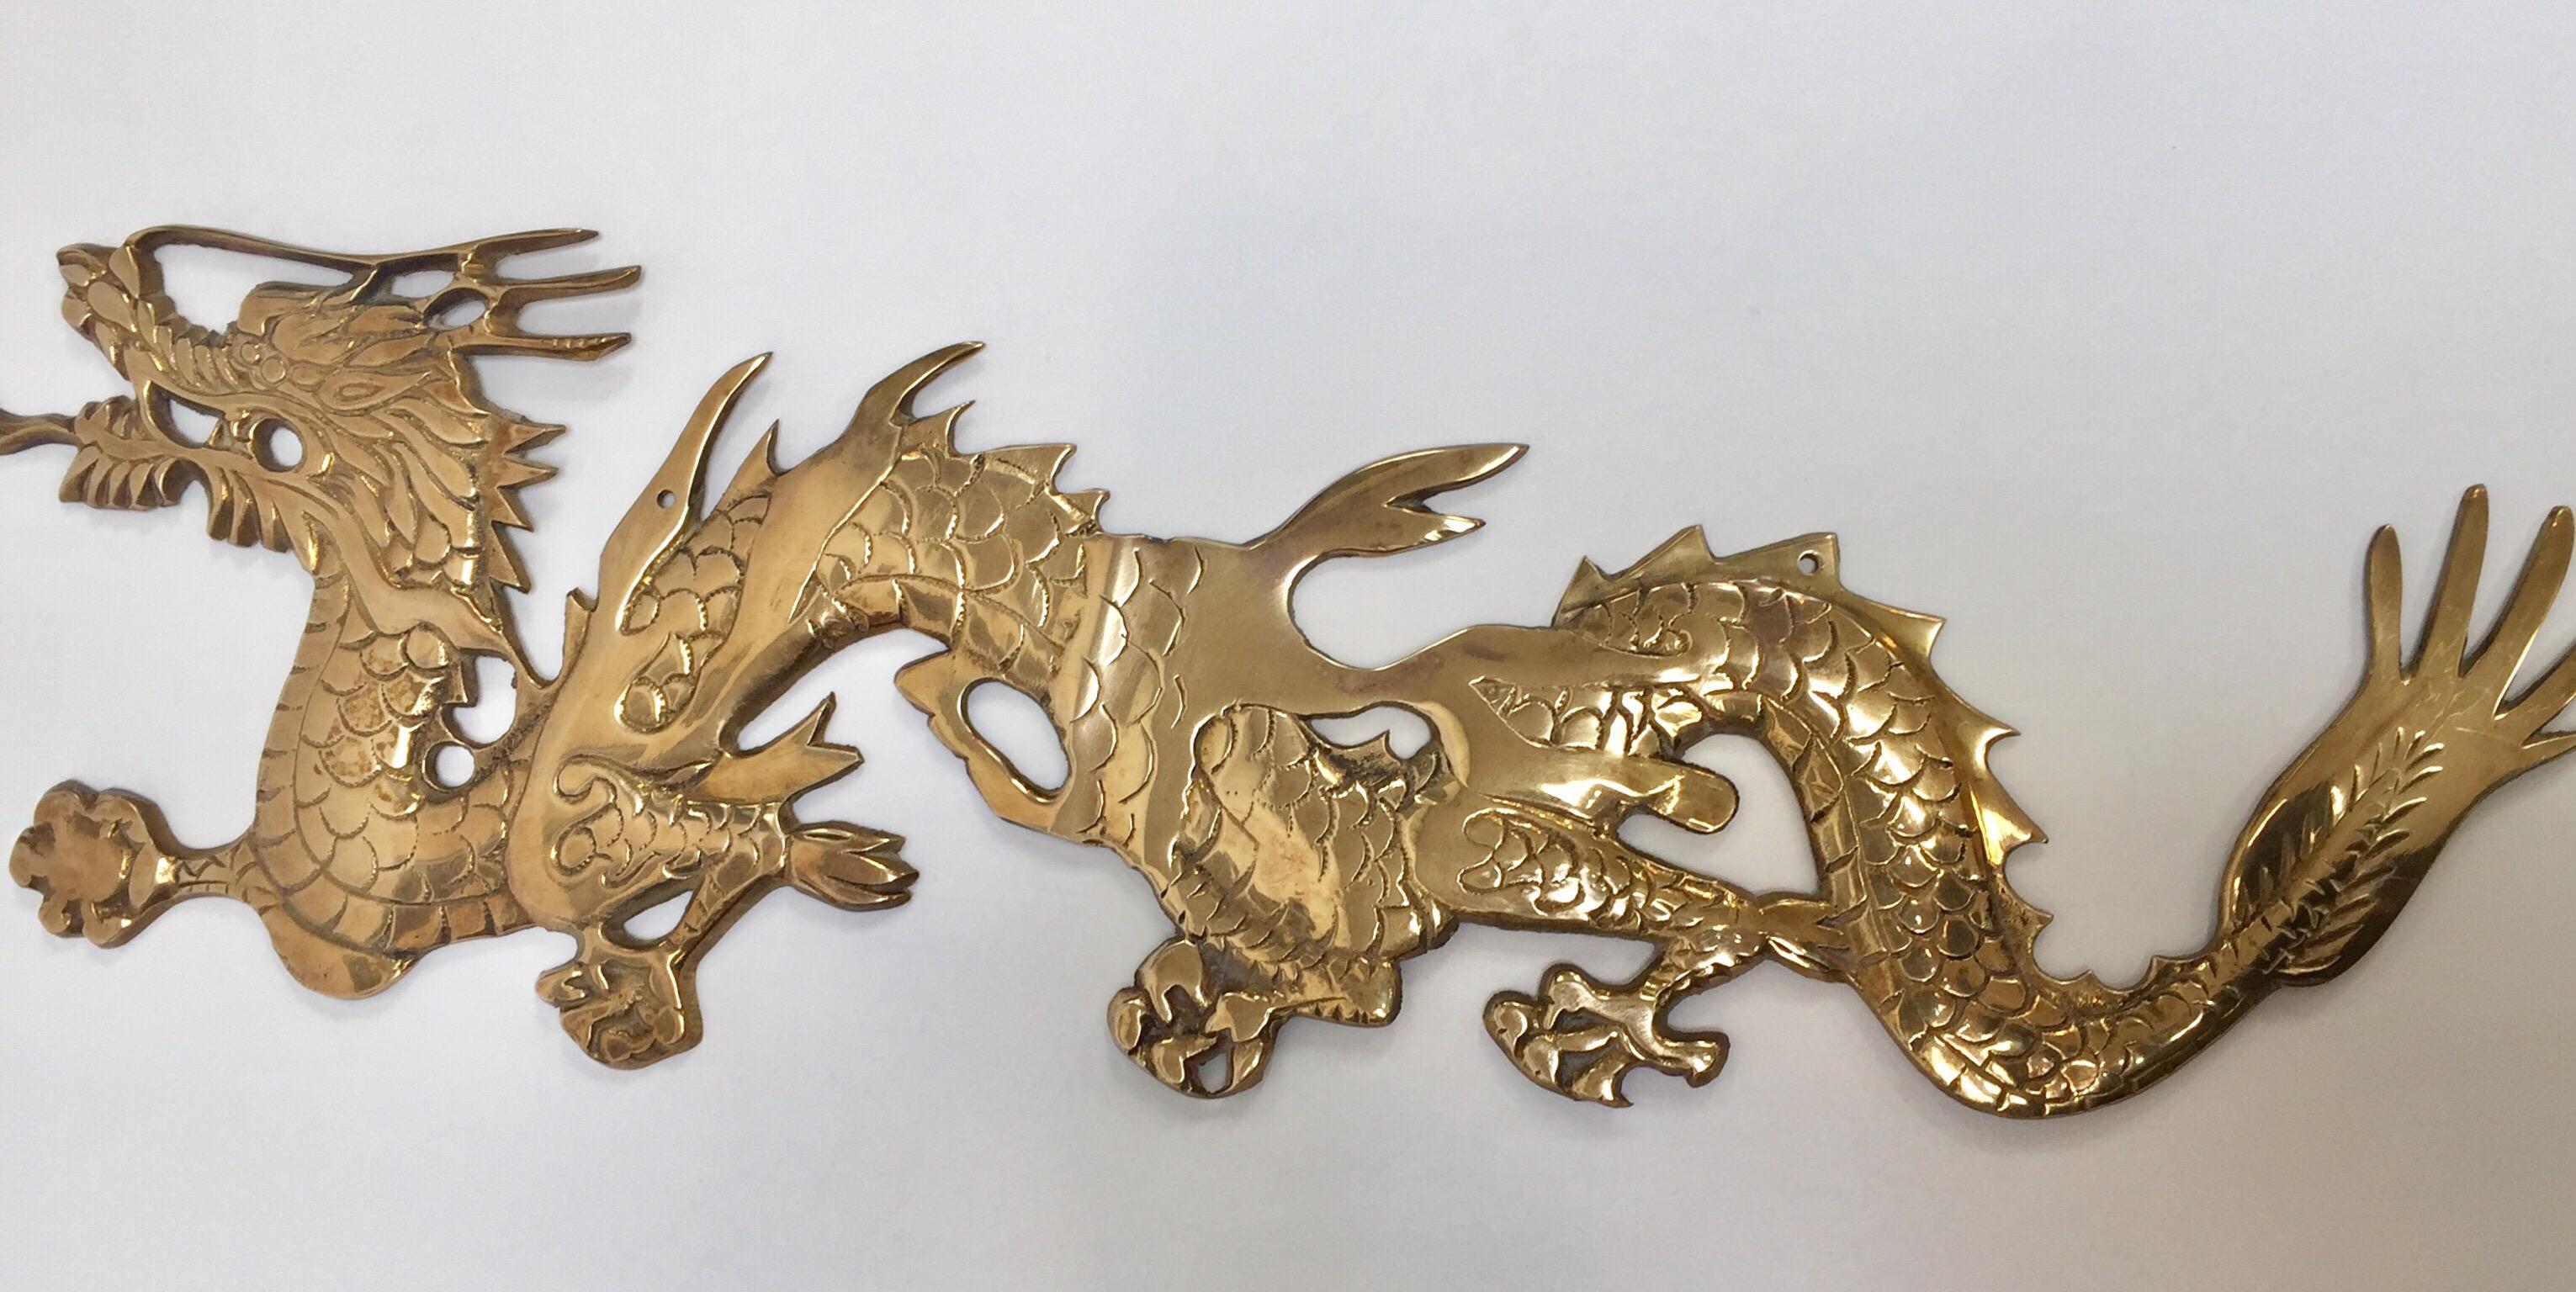 20th Century Large Pair of Asian Cast Brass Dragons Chasing a Ball Wall Mount